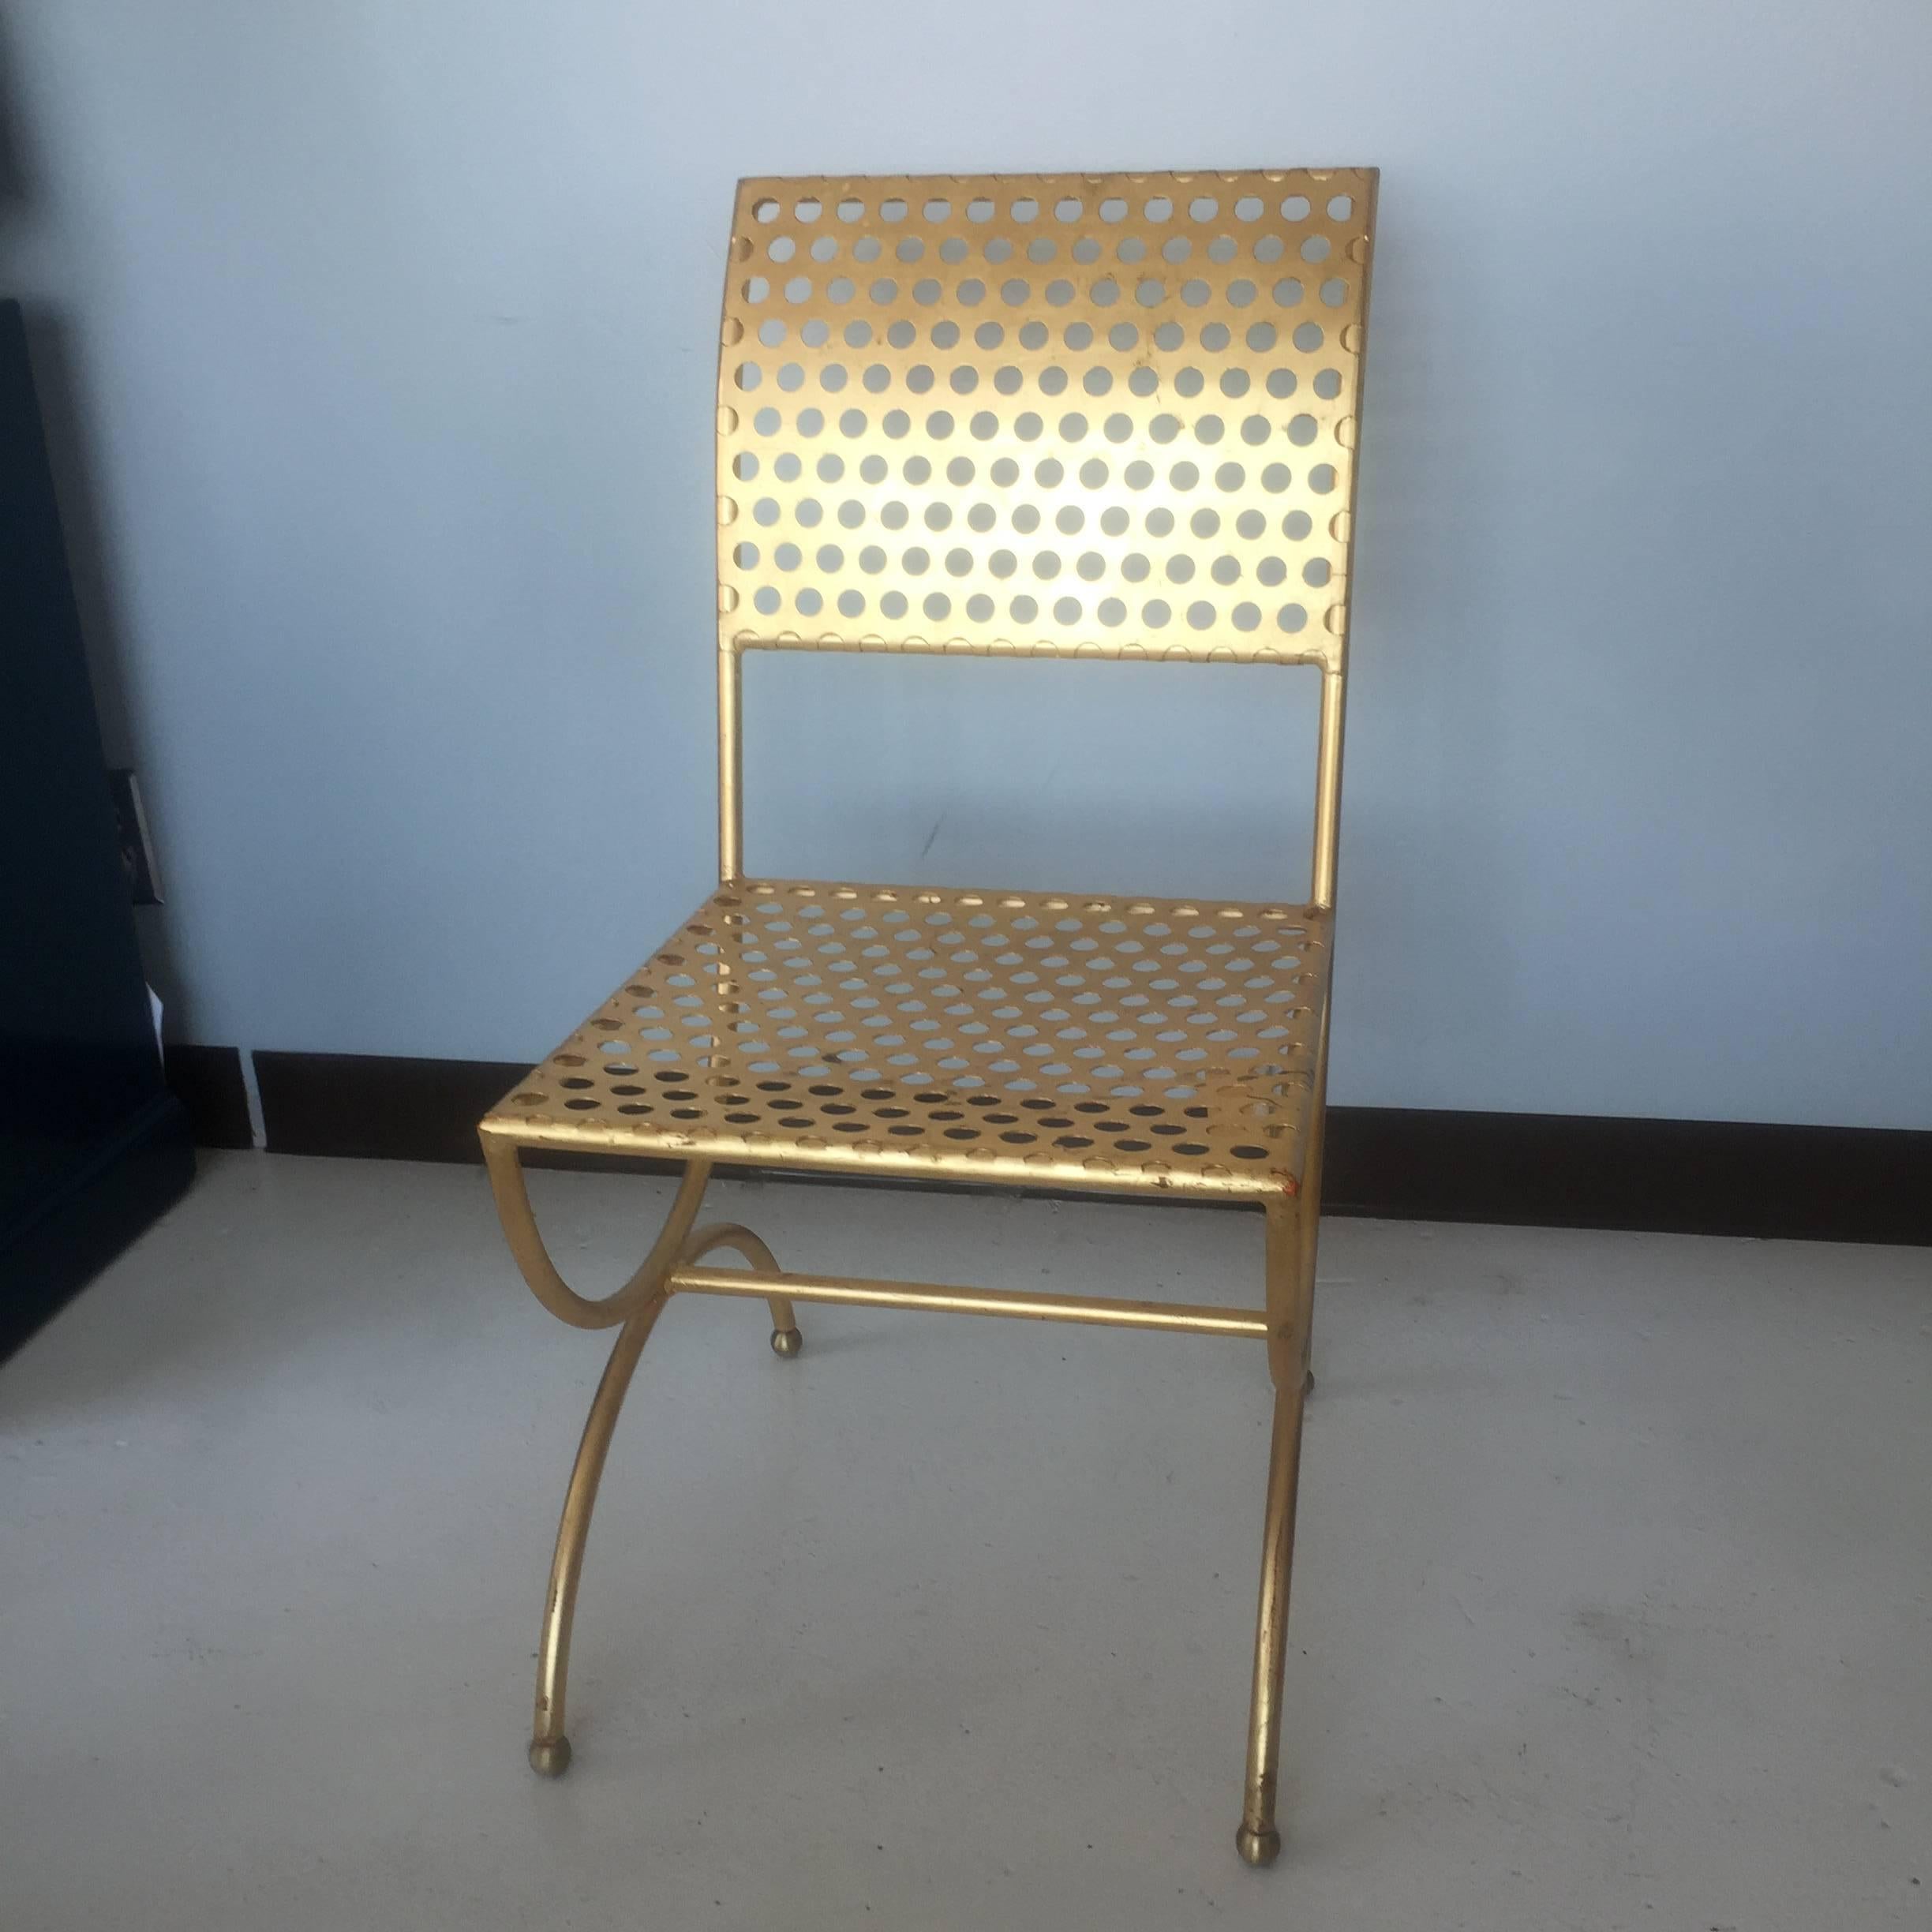 Hollywood Regency Tony Duquette Gilt Iron Palmer Chair For Sale